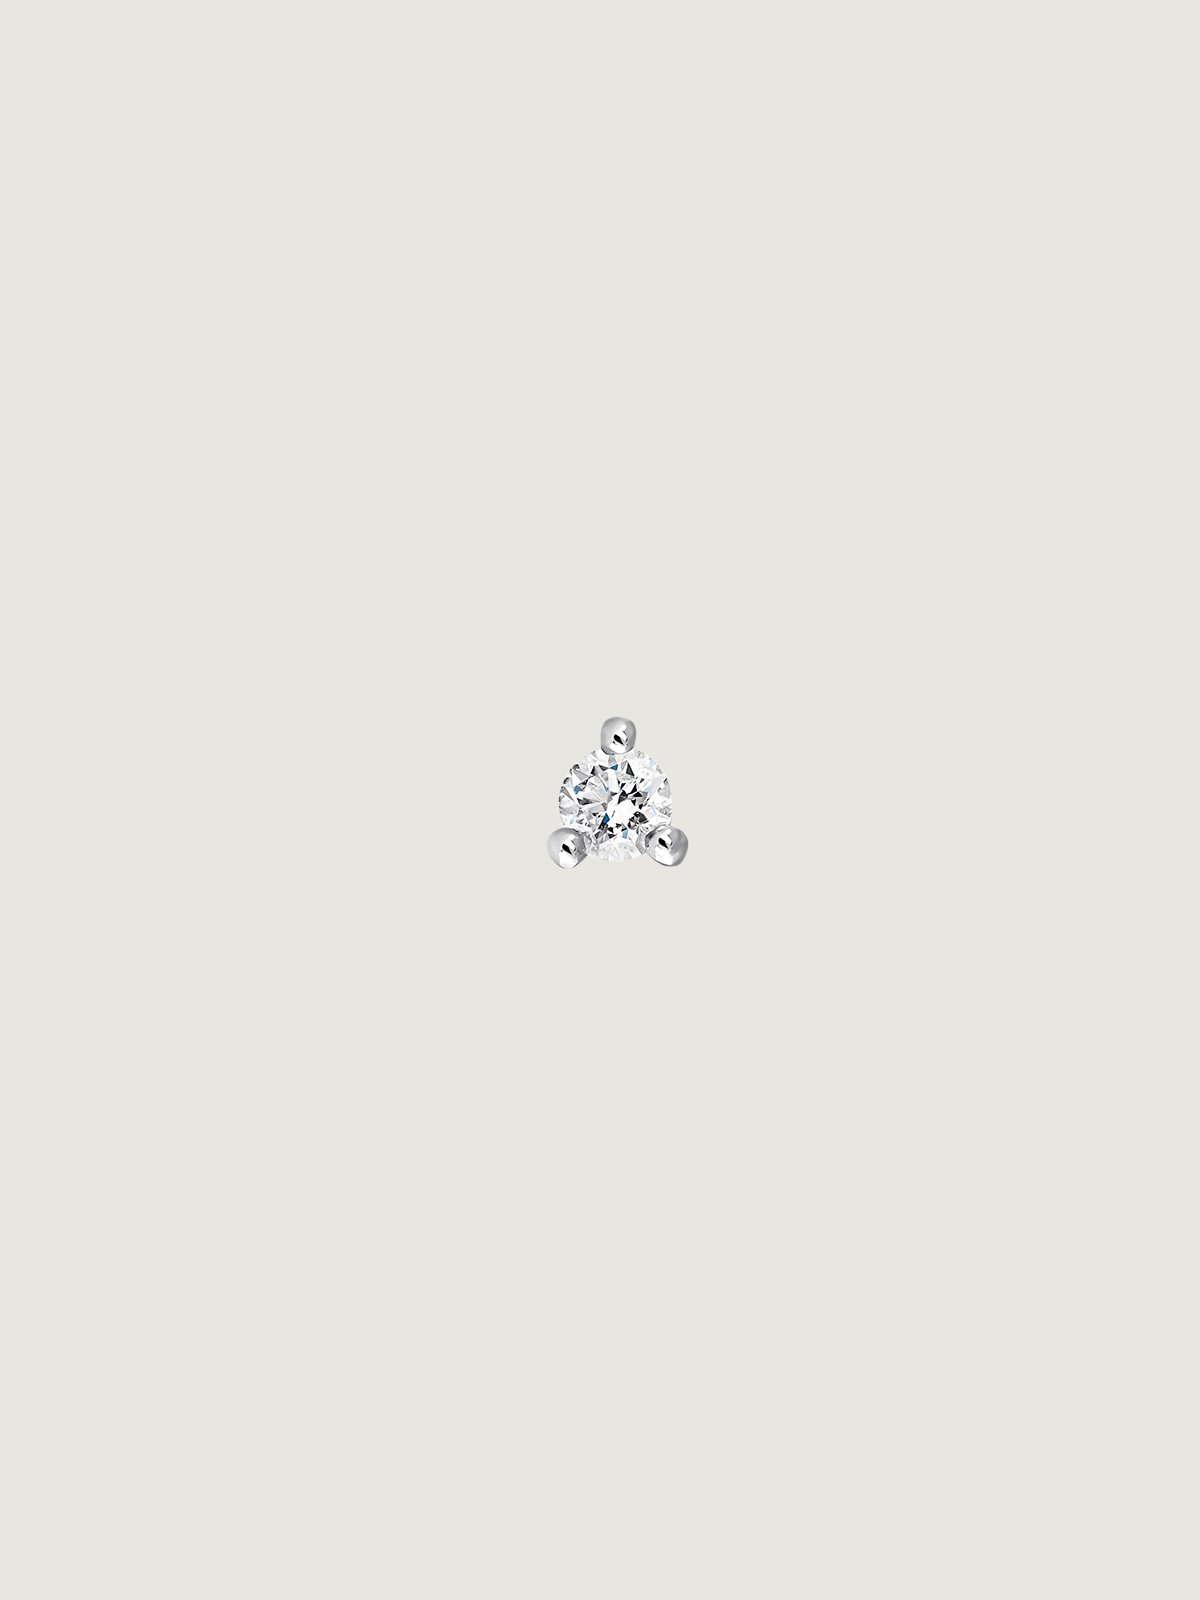 18K white gold piercing with diamonds